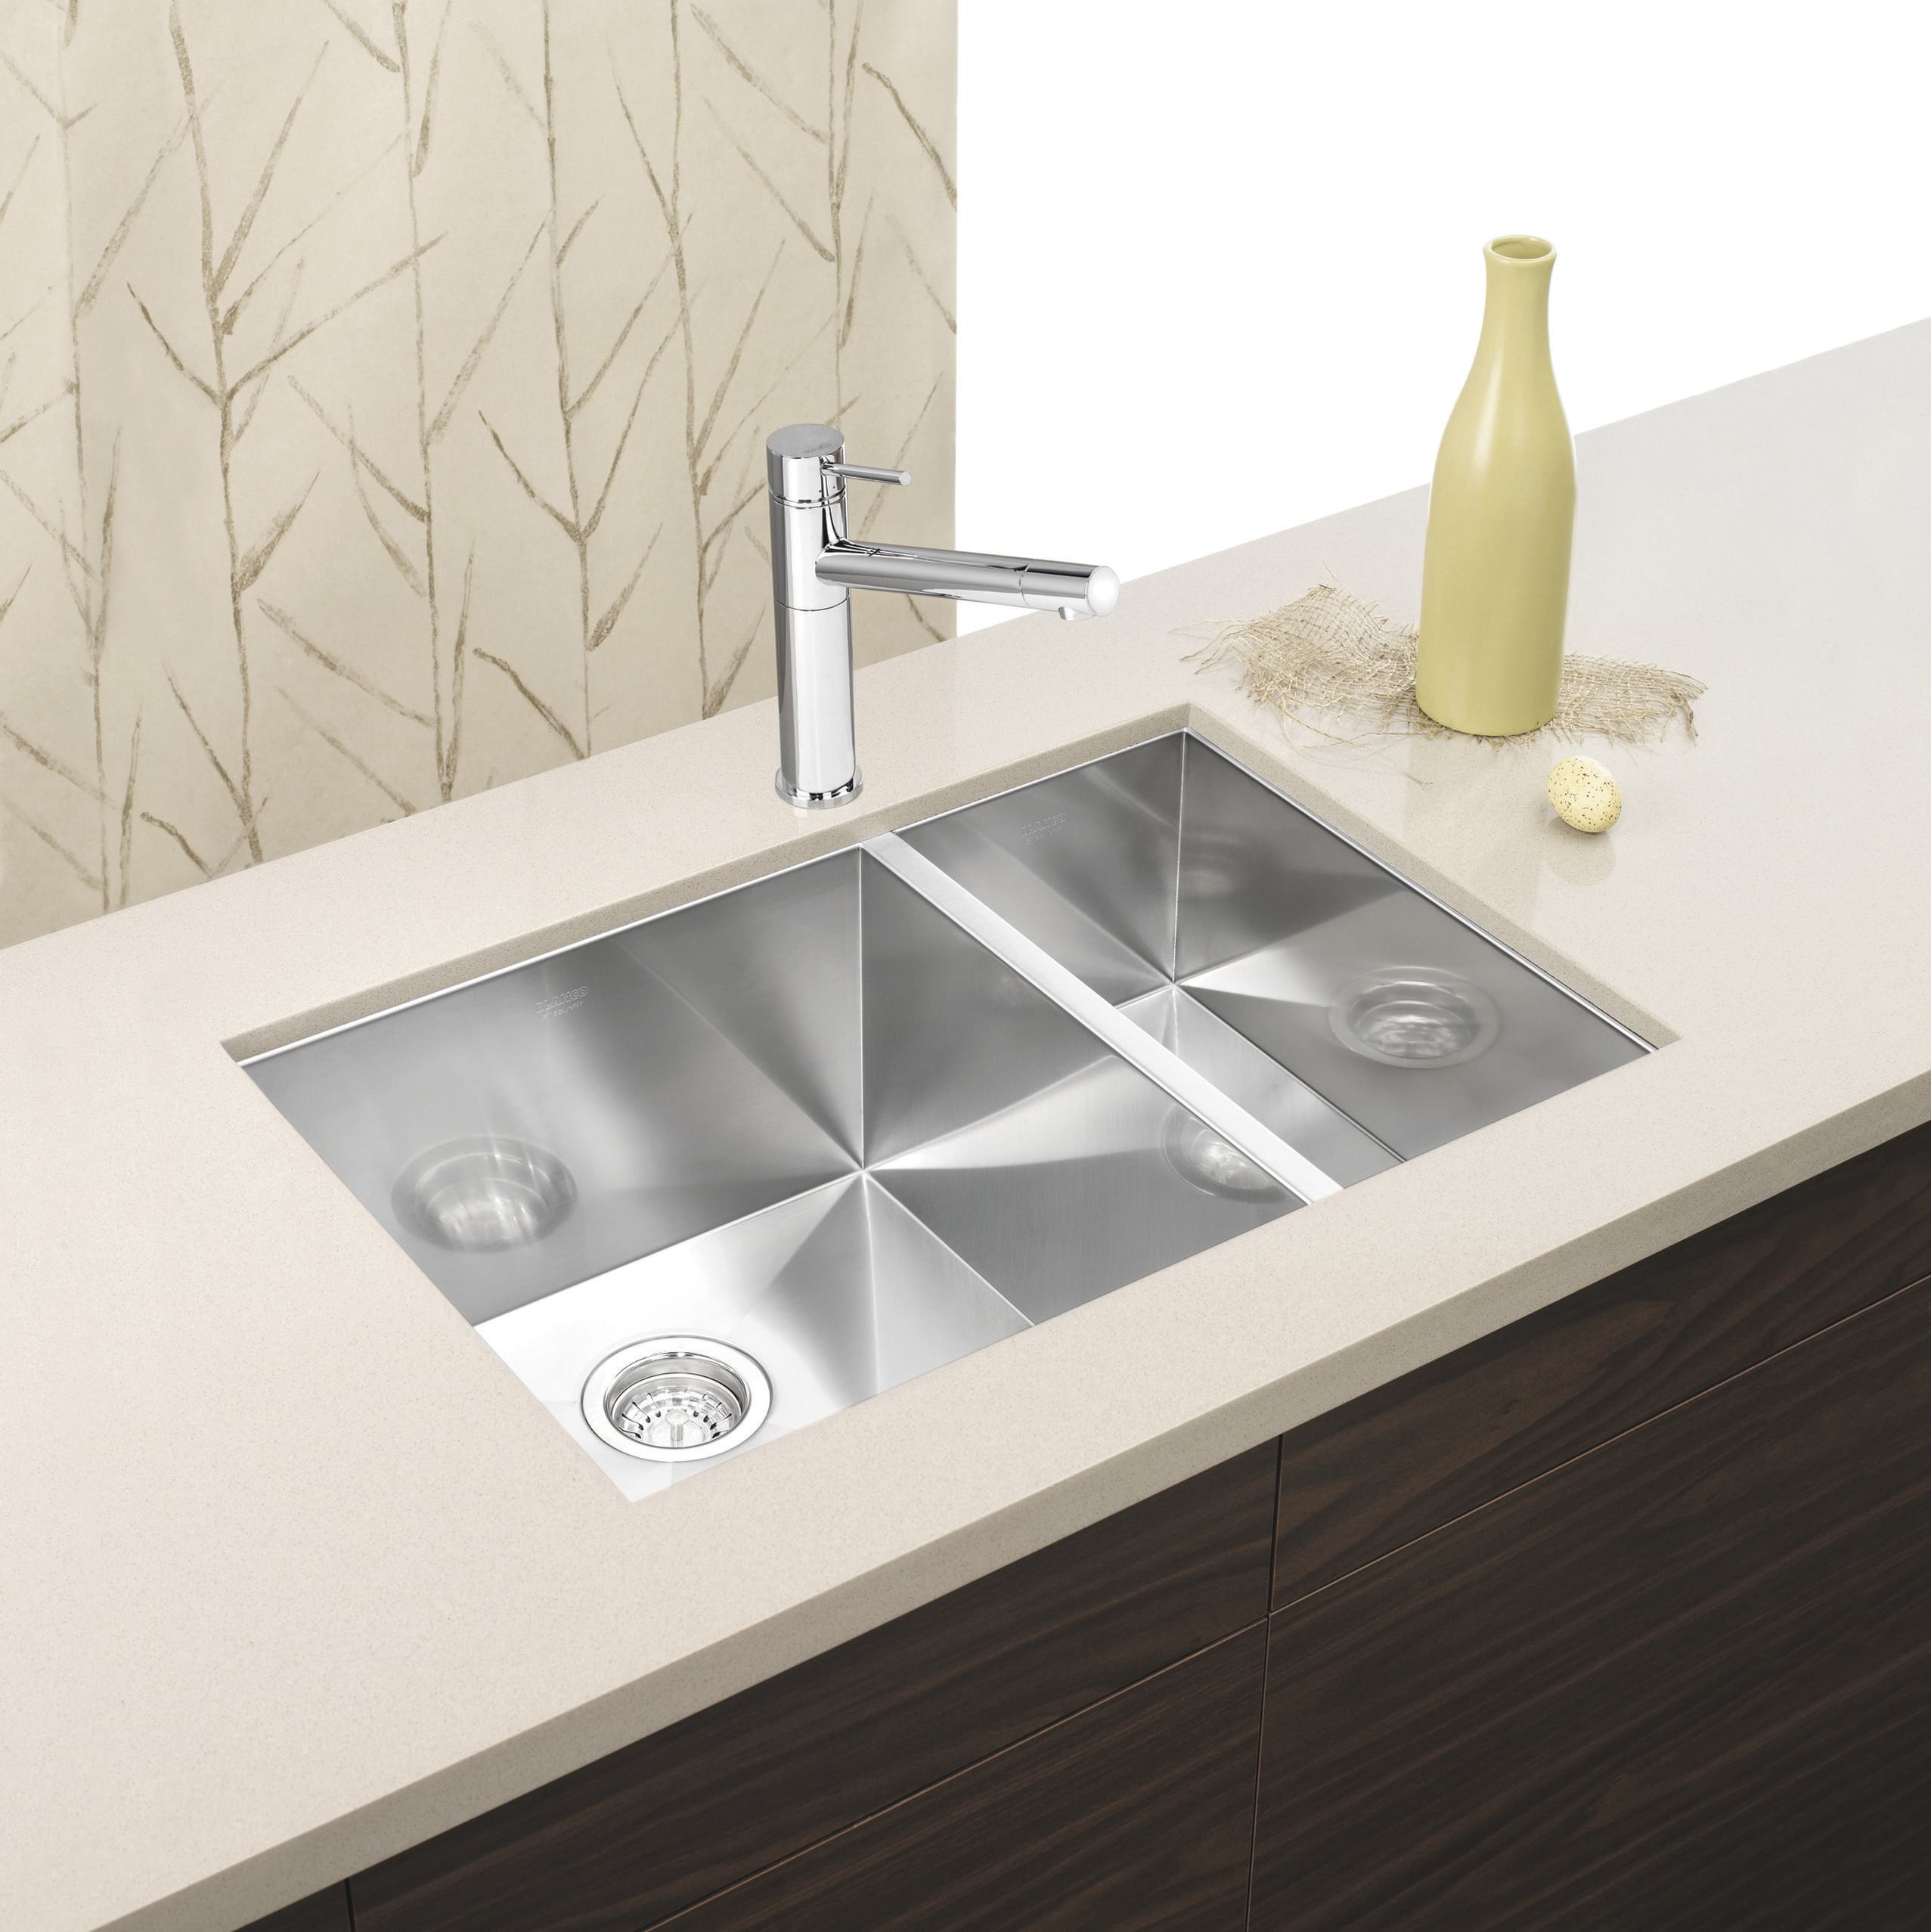 Stainless Steel Sinks Everything You Need to Know